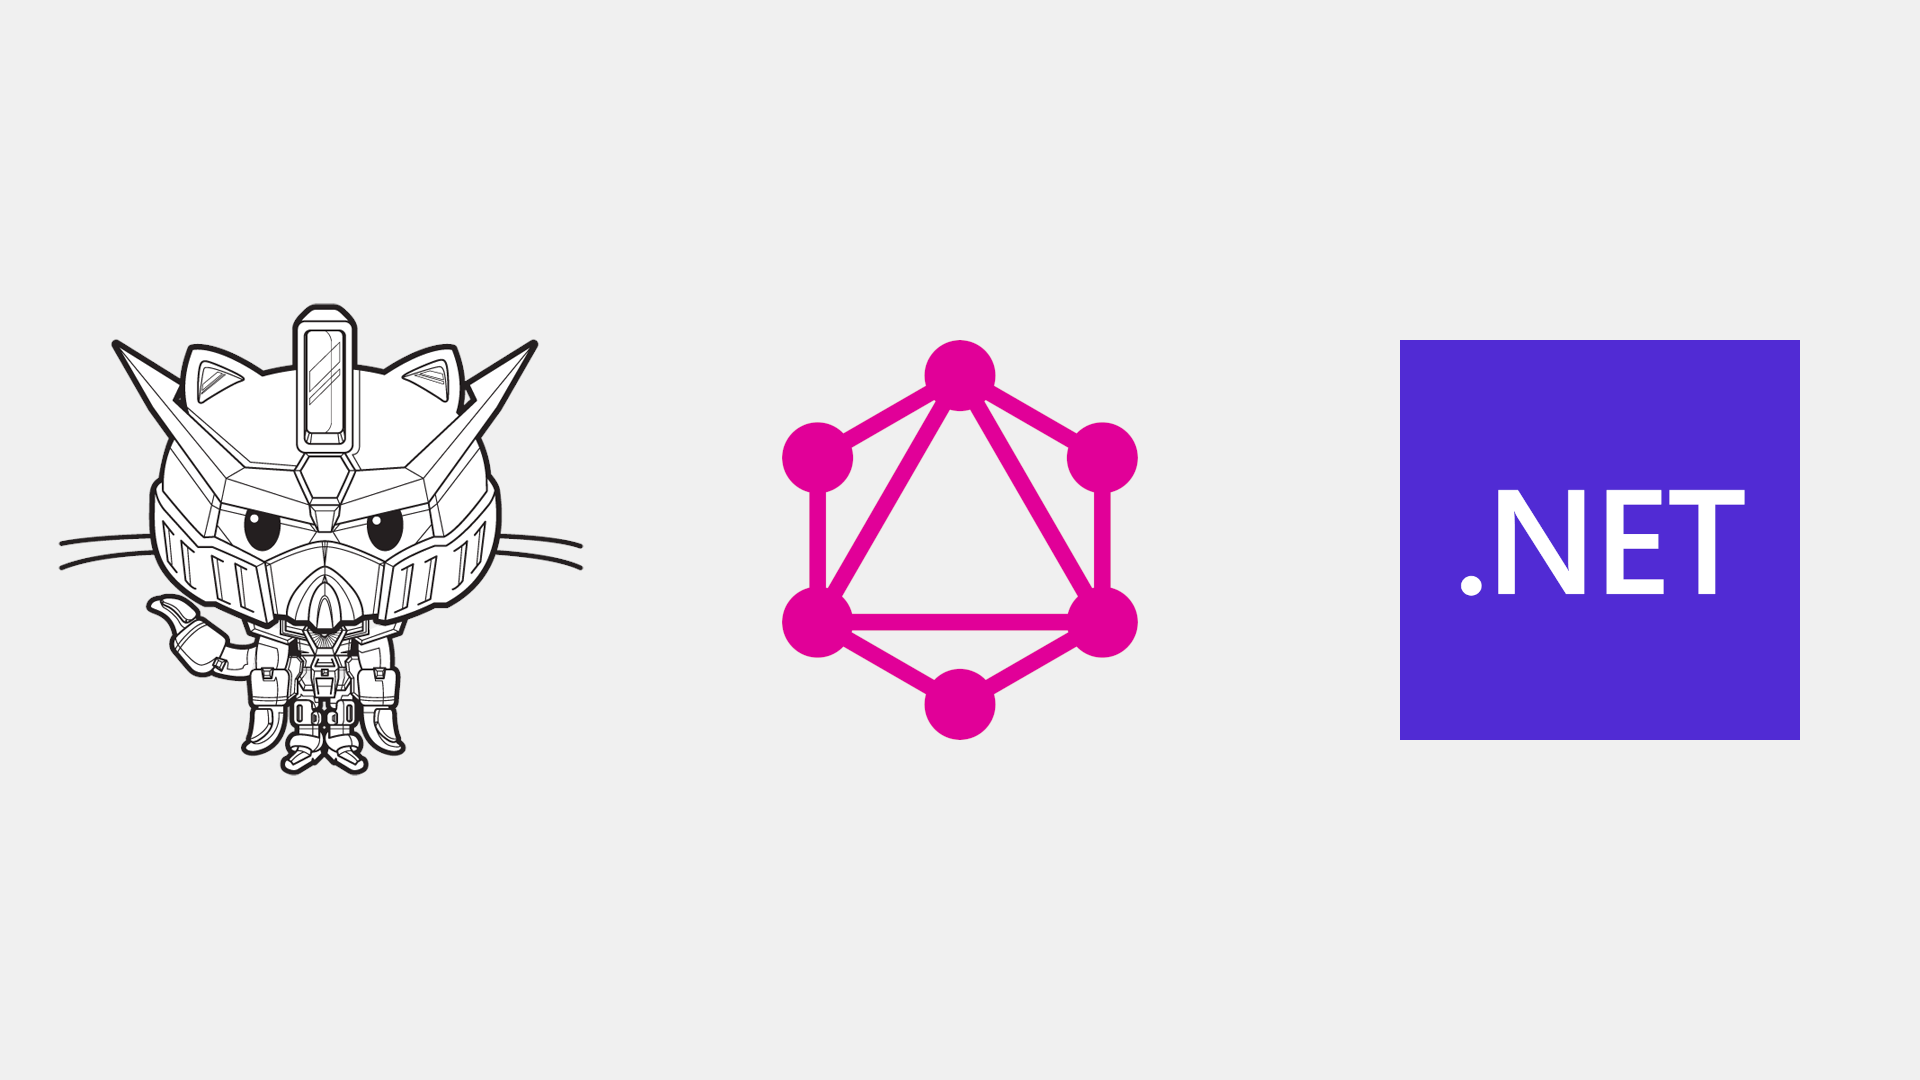 Using Octokit.GraphQL to interact with the GitHub discussions API